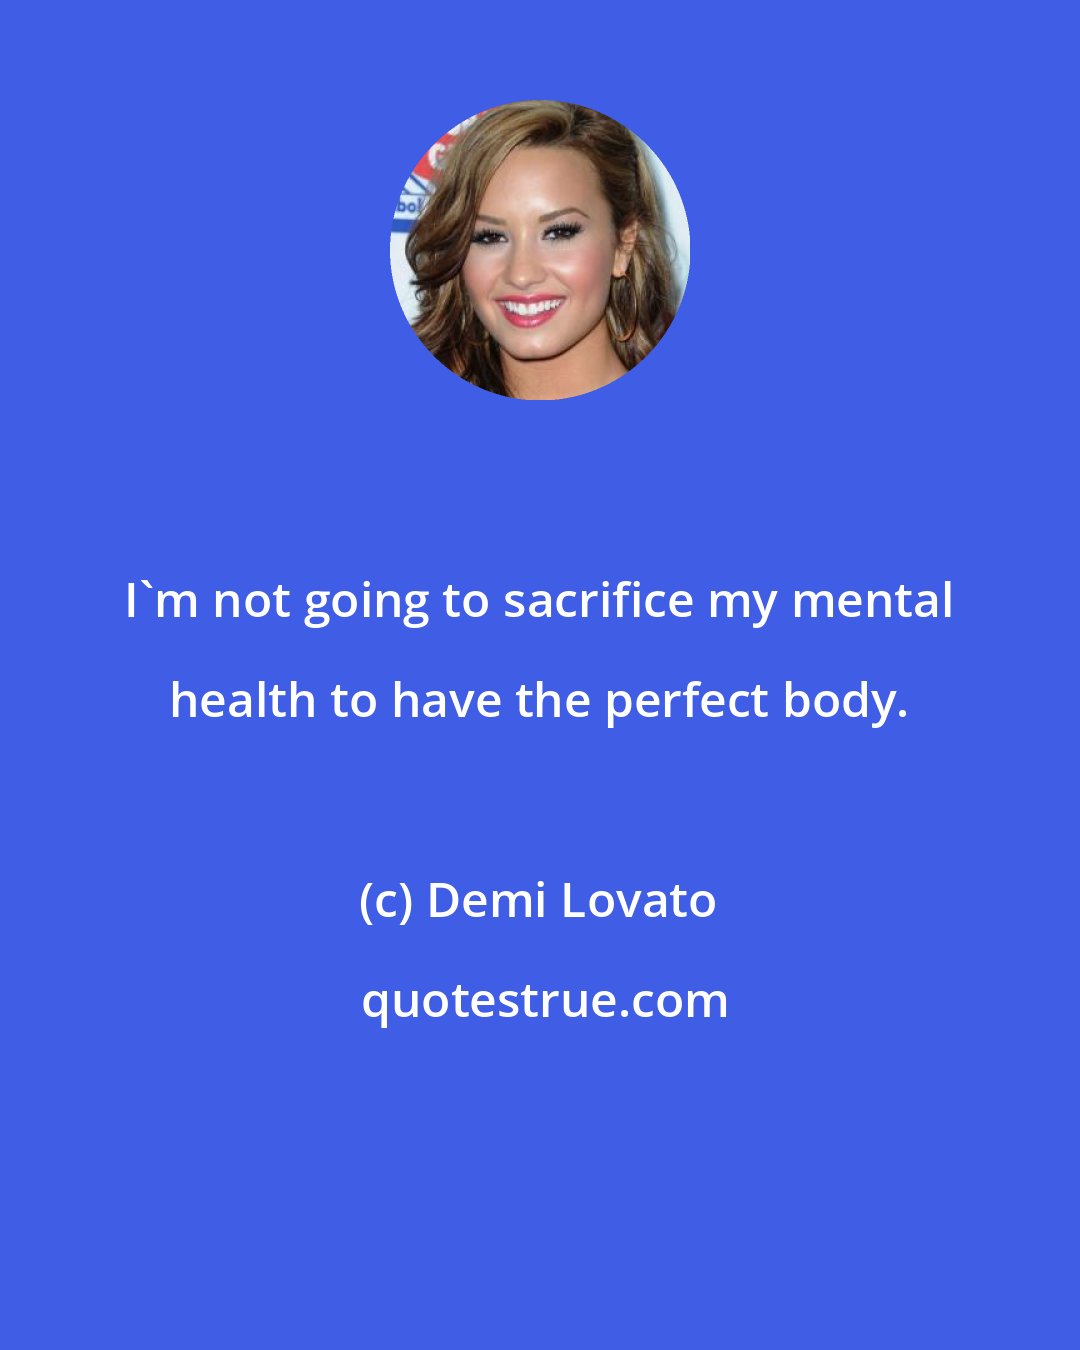 Demi Lovato: I'm not going to sacrifice my mental health to have the perfect body.